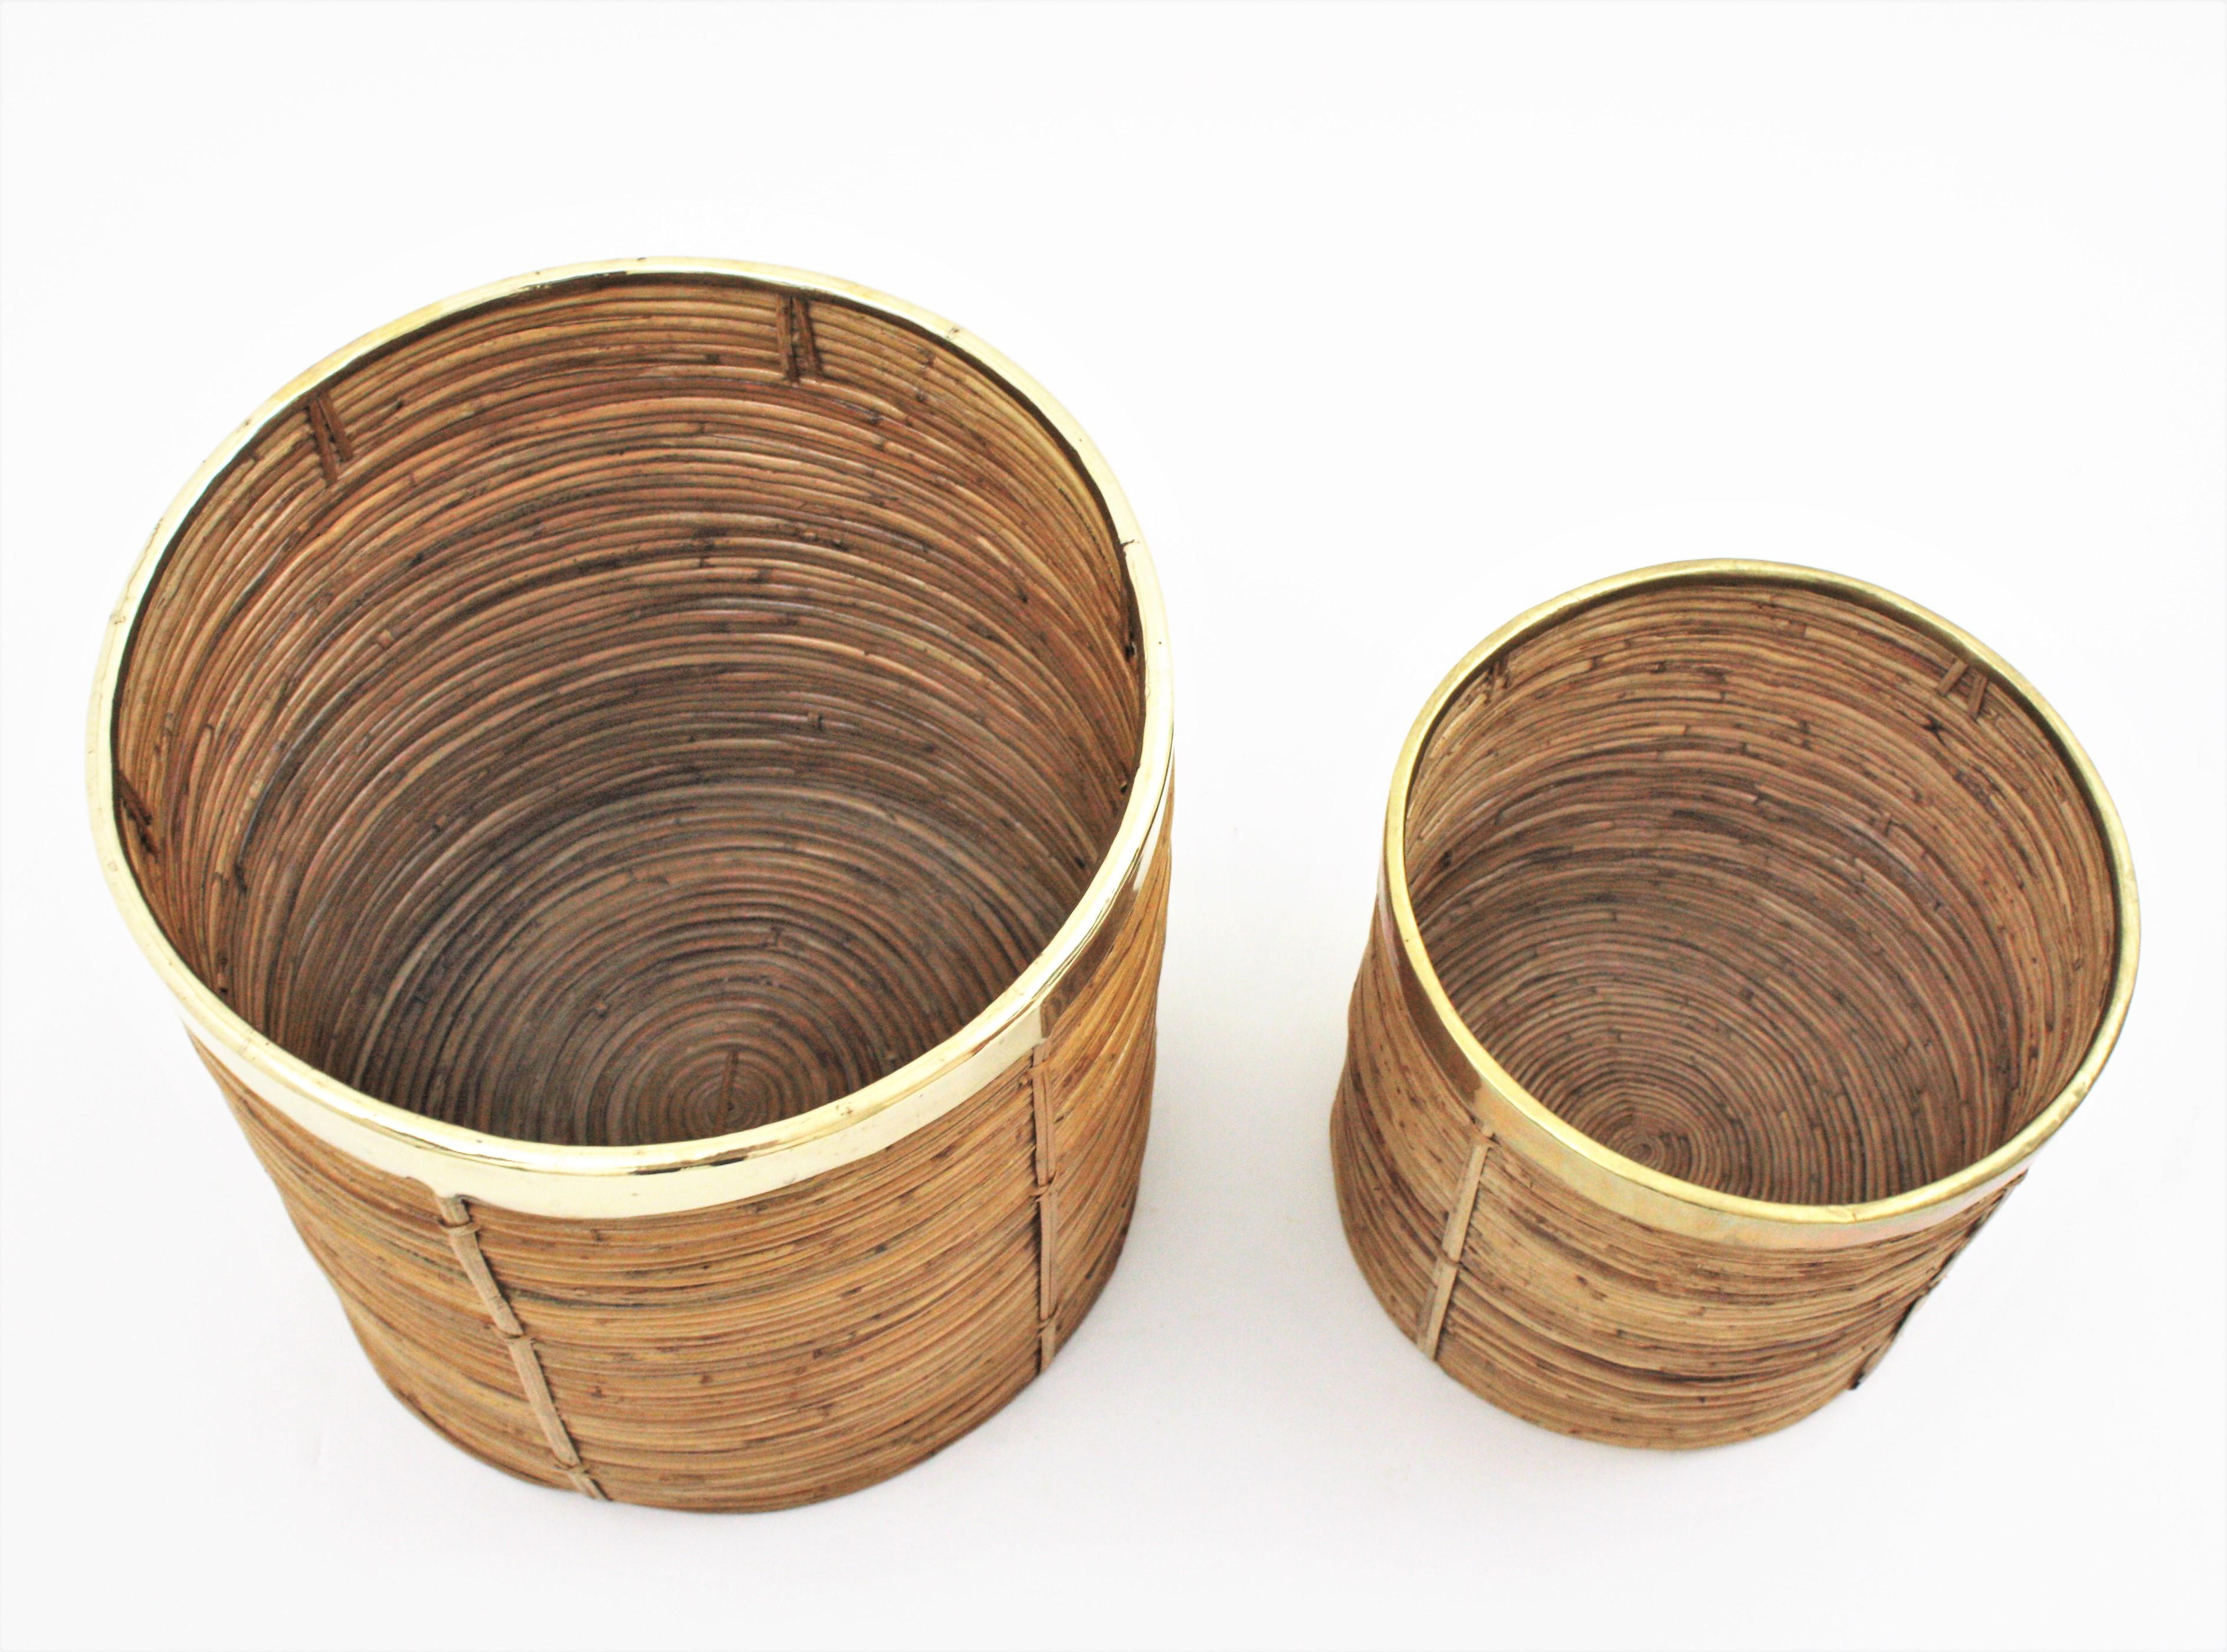 Pair of Mid-Century Brass & Rattan Bamboo Round Planters or Baskets, 1970s For Sale 1